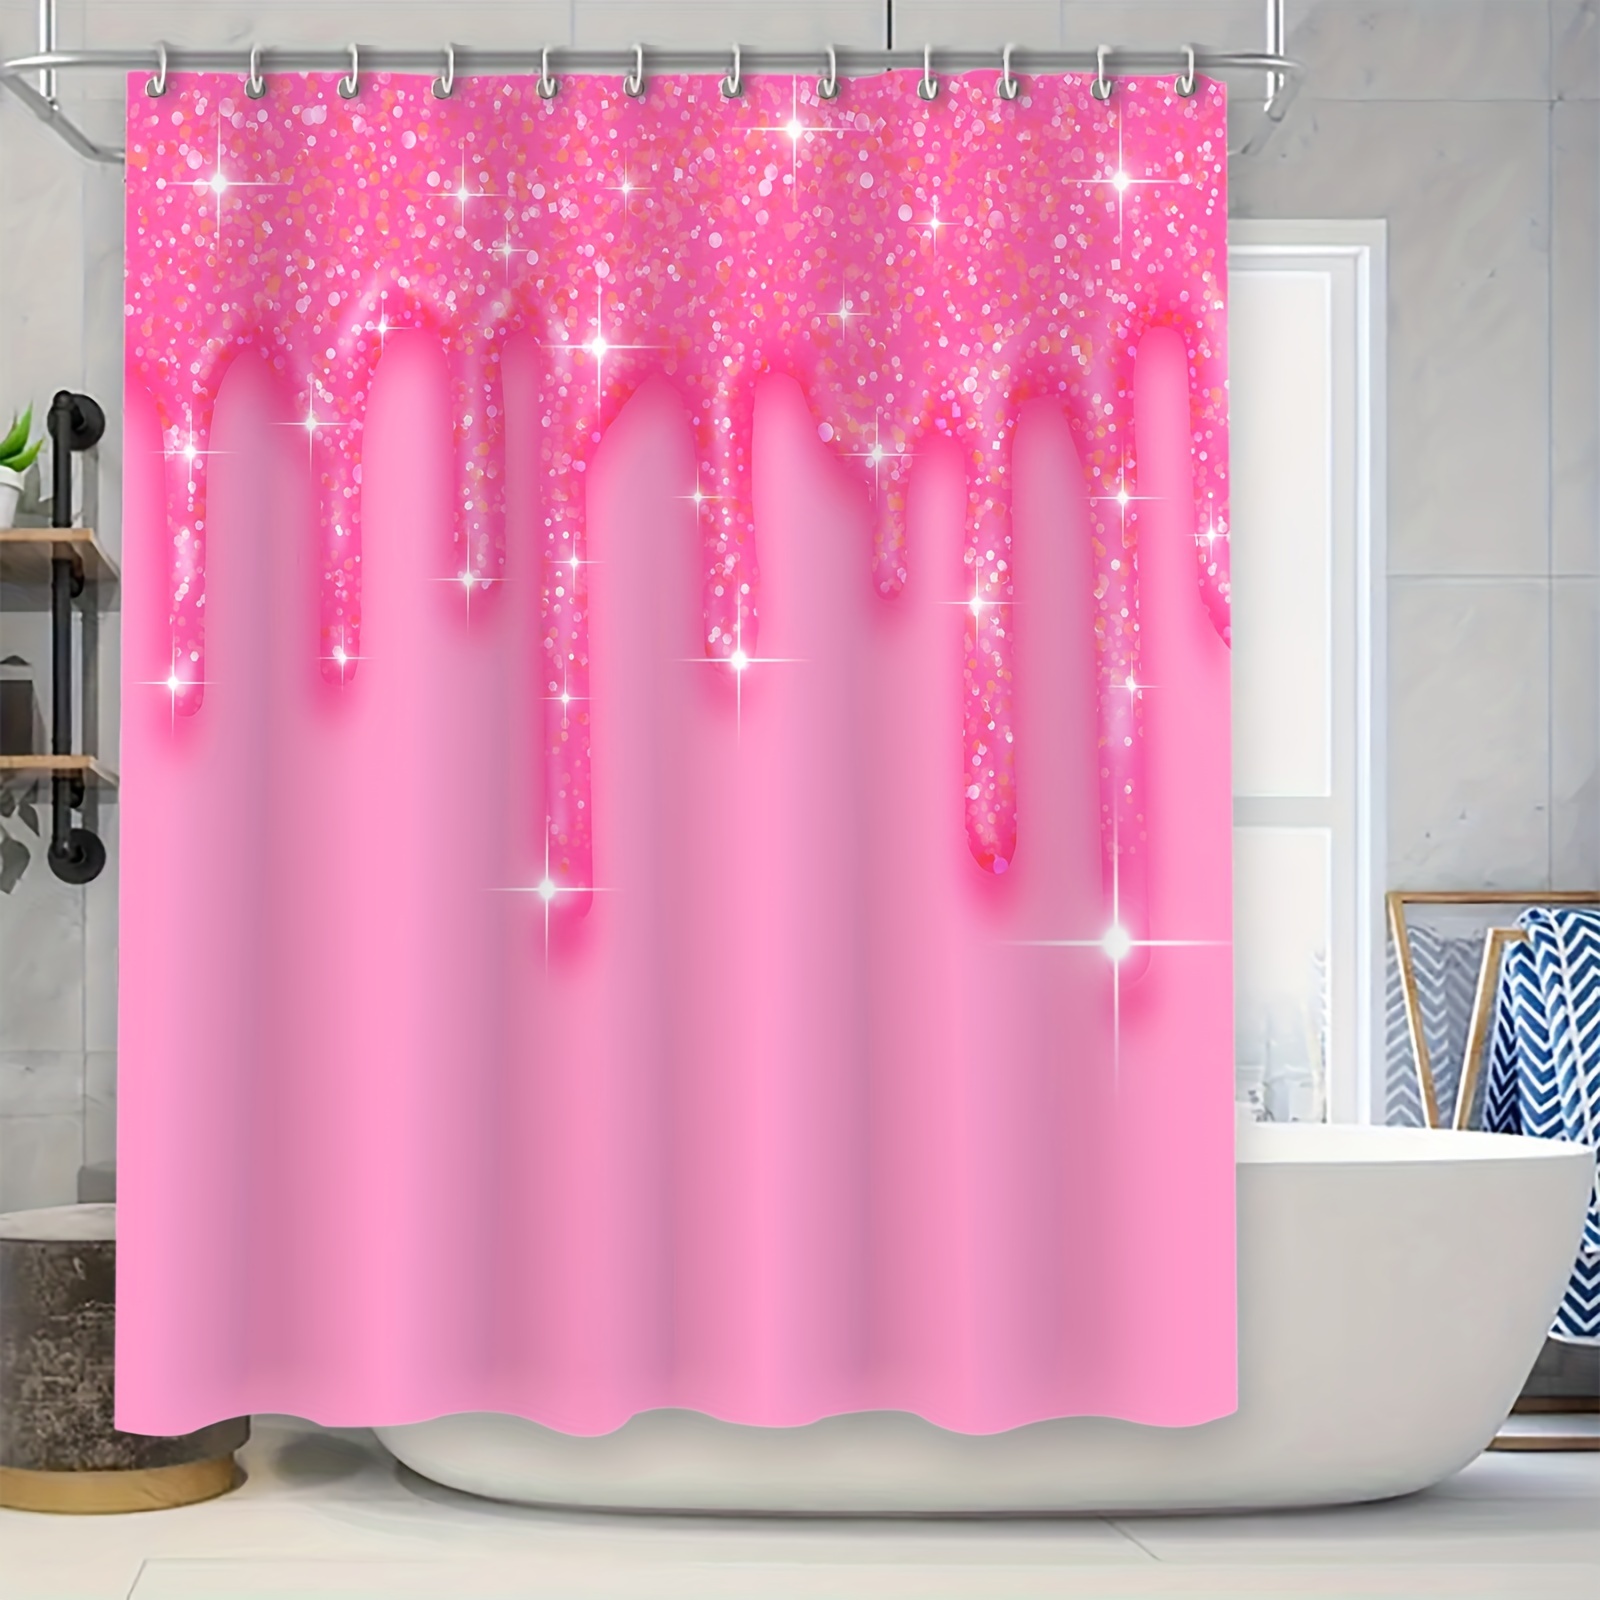 

Fashionable Pink Crystal Diamond Shower Curtain Set With 12 Hooks, Water-resistant Polyester Fabric, 70.8"x70.8", Machine Washable, Mold-resistant Bath Partition For Home Bathroom Decor